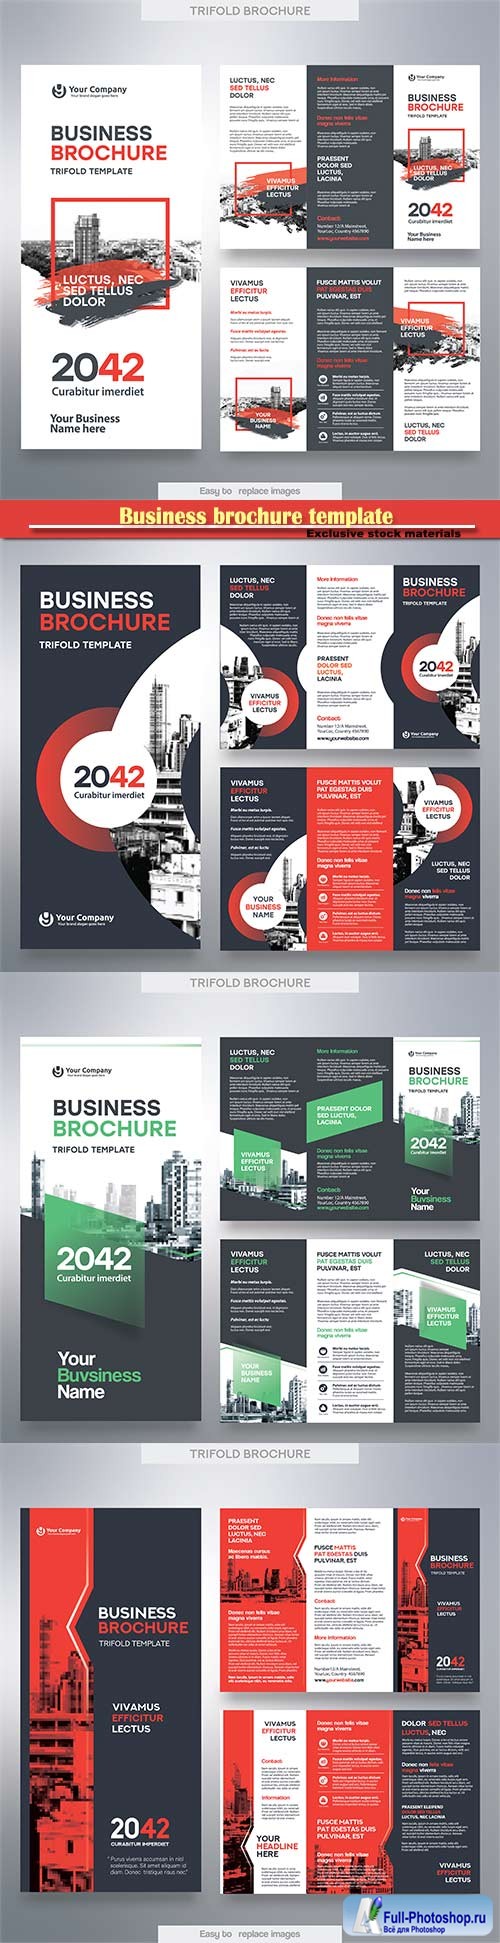 Business brochure template in tri fold layout vector design 